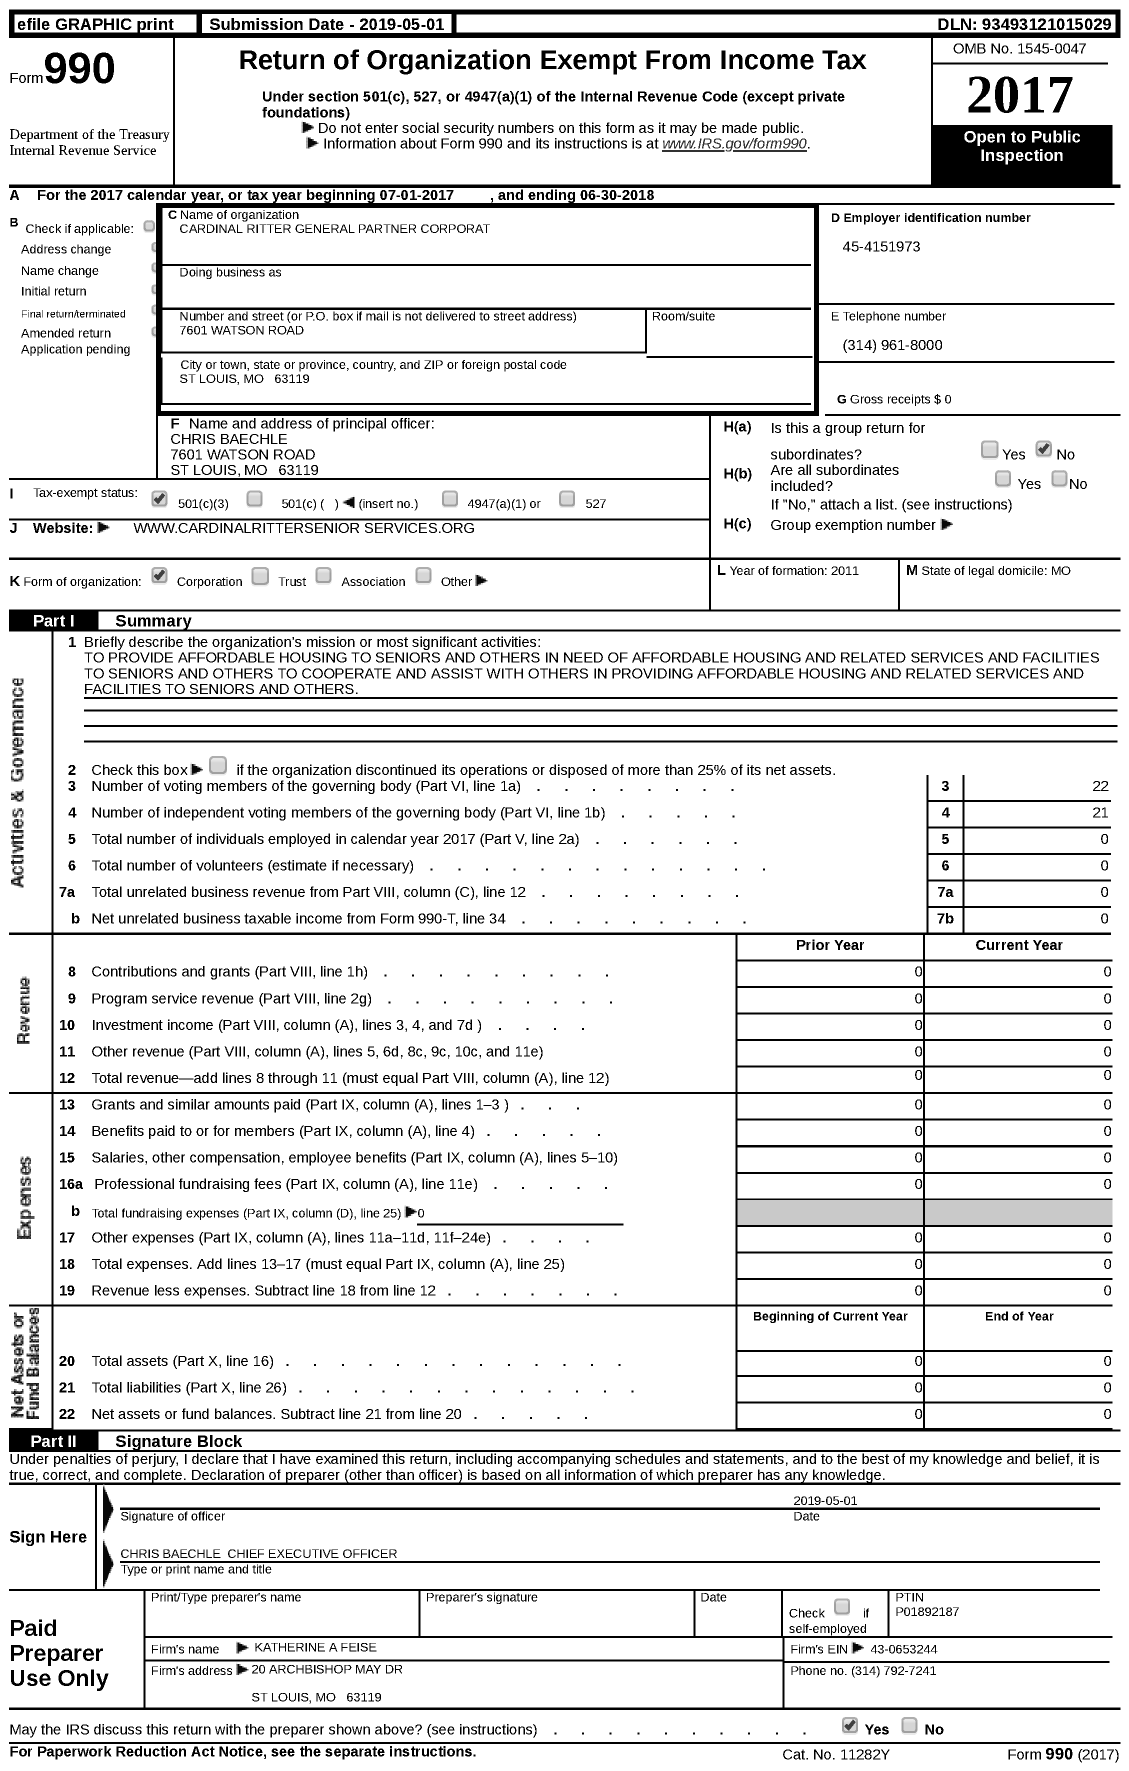 Image of first page of 2017 Form 990 for Cardinal Ritter General Partner Corporation